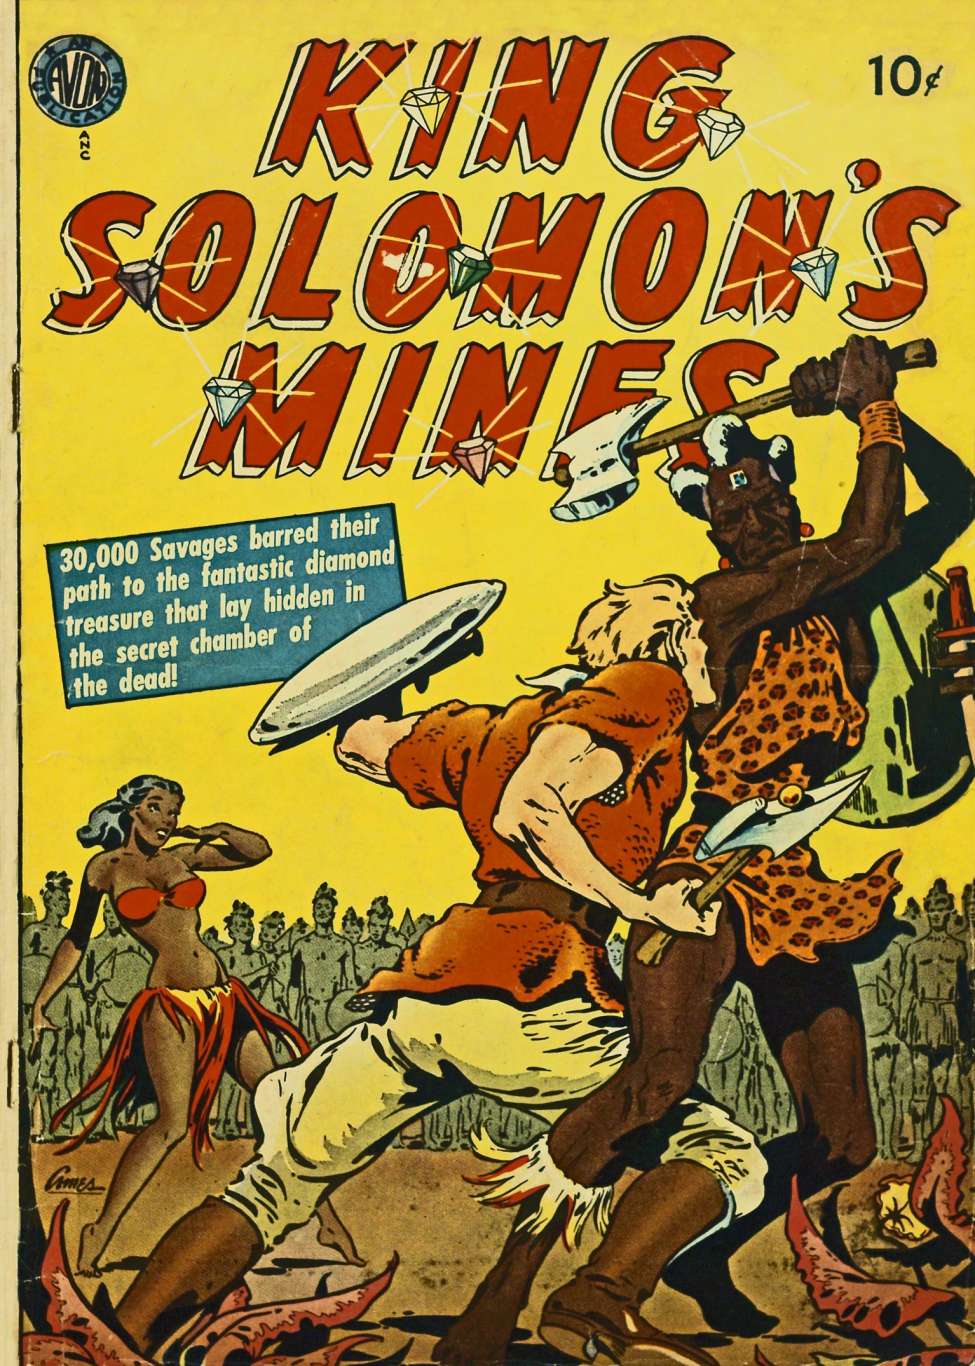 Book Cover For King Solomon's Mines 1 - Version 2